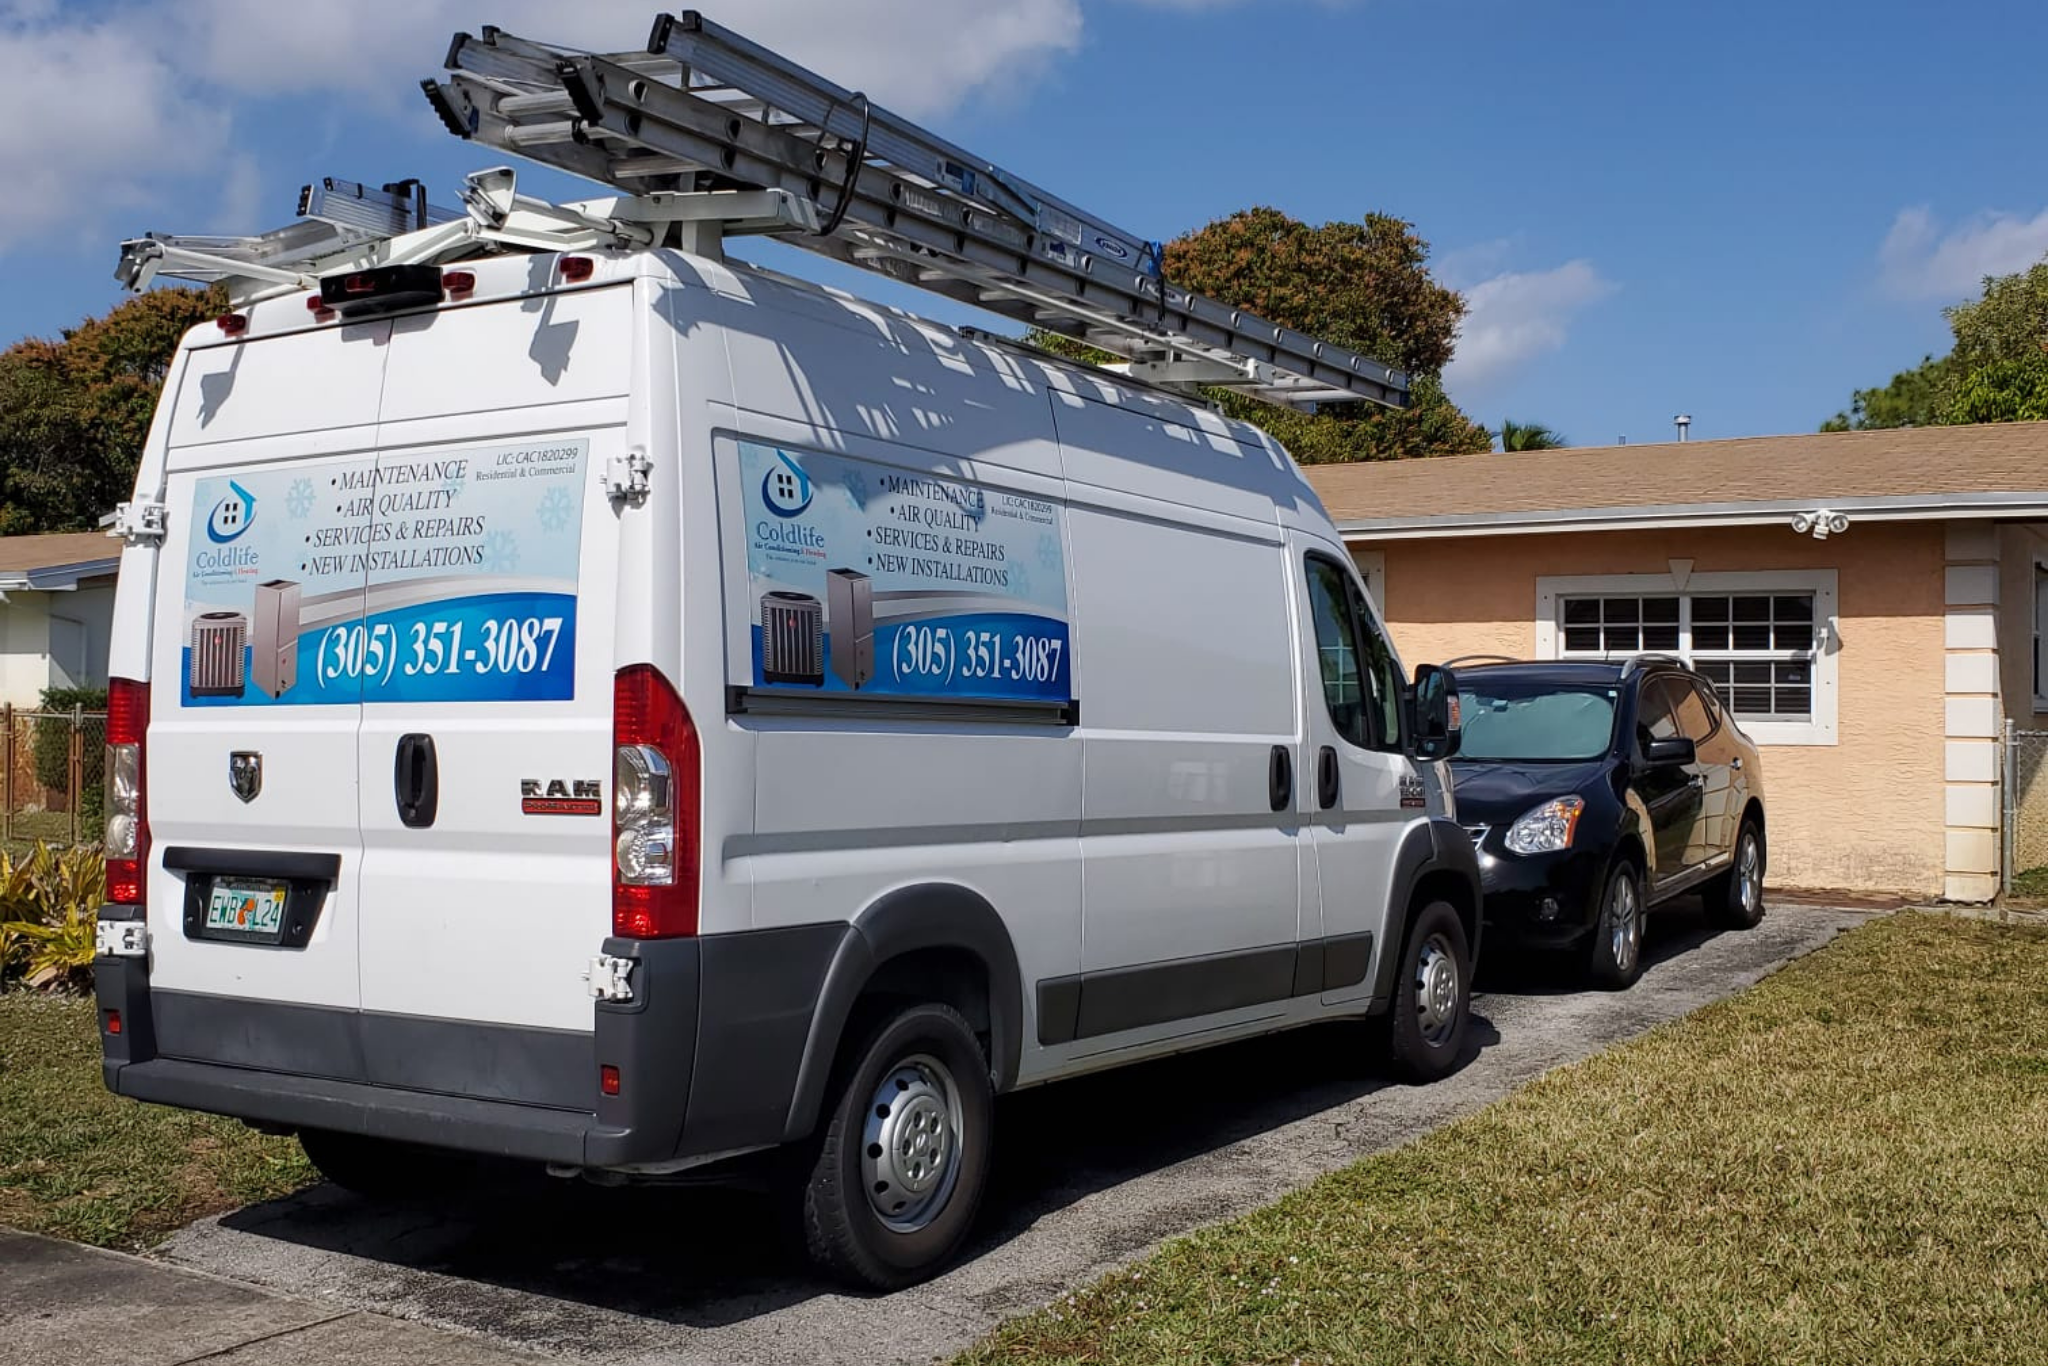 Coldlife AC Air Duct Cleaning Services in Broward and Miami Dade Counties